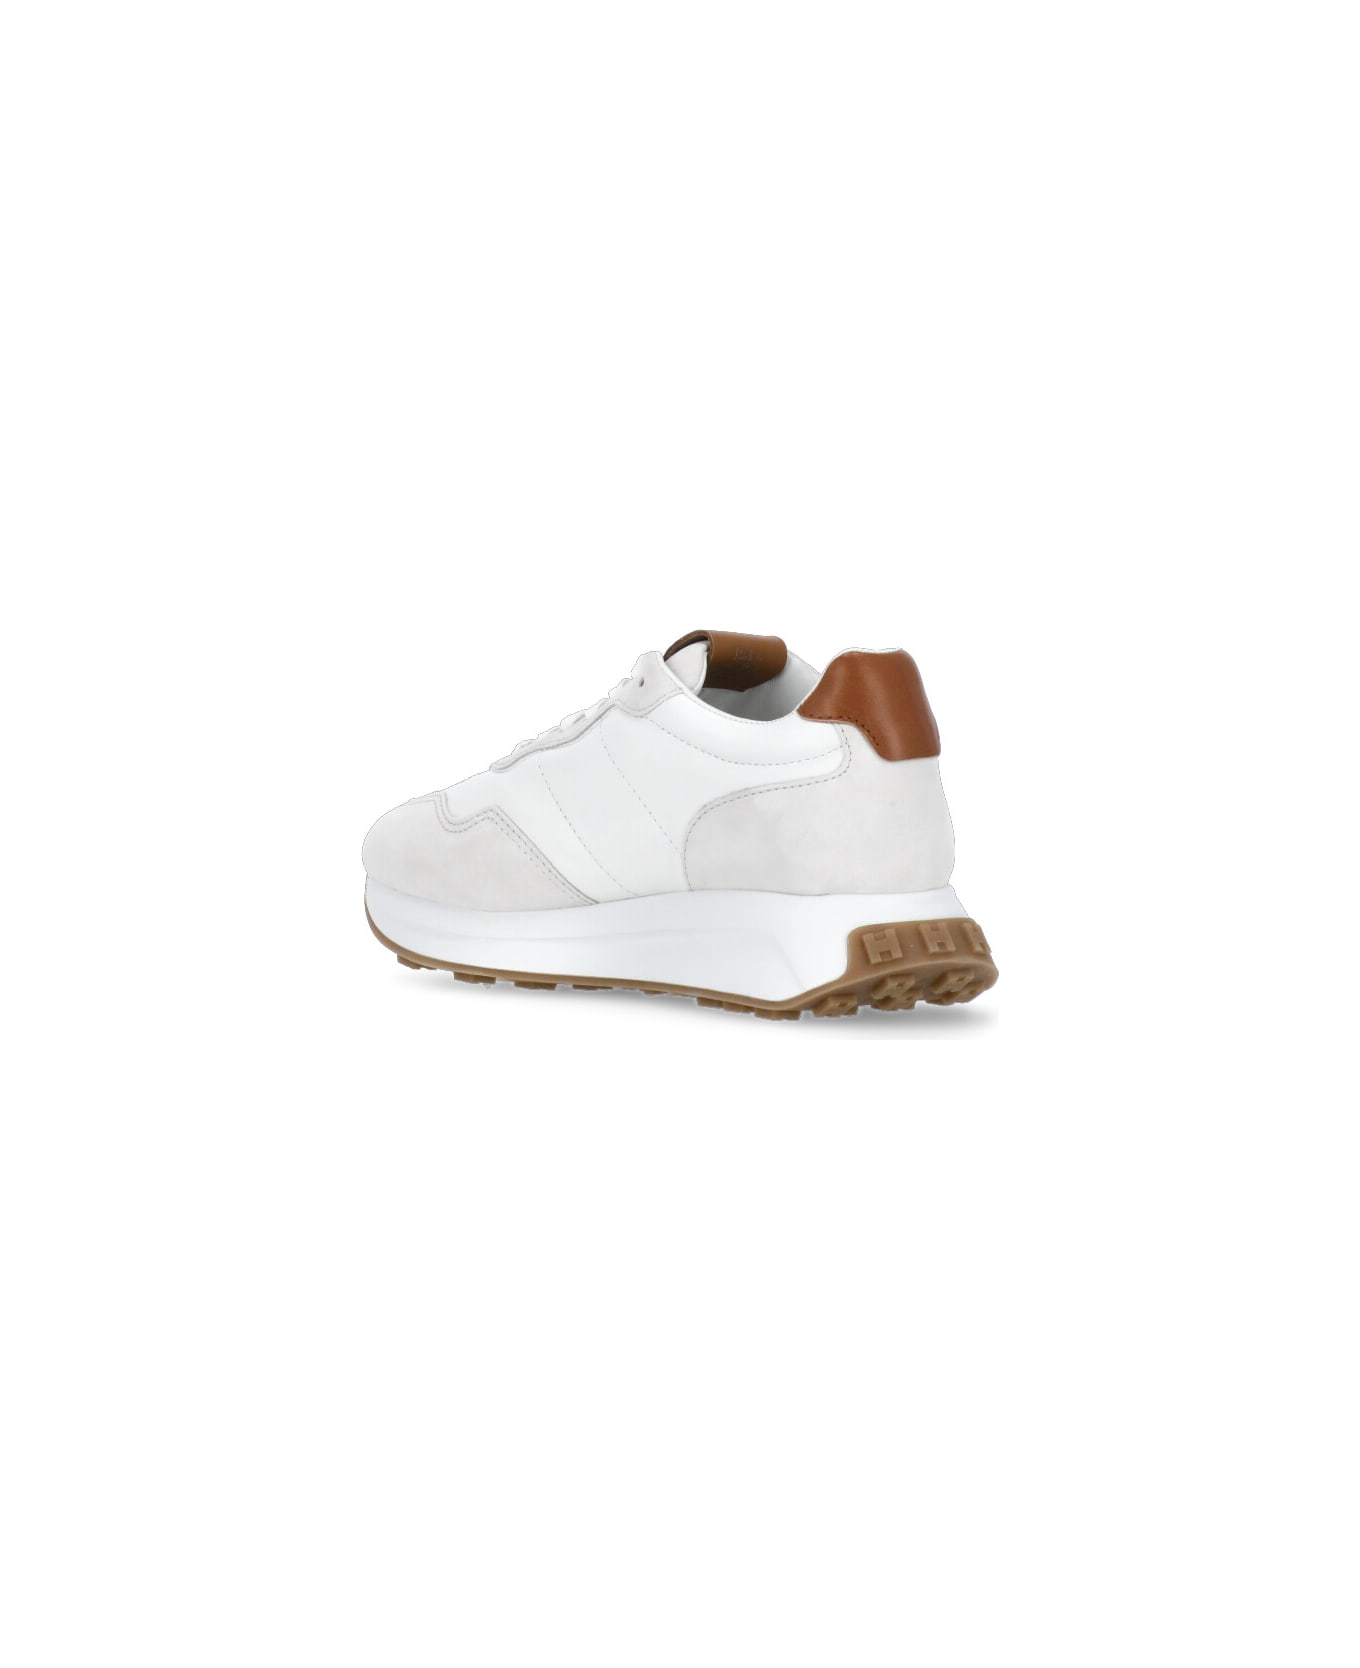 Hogan H641 Laced H Patch Sneakers - White